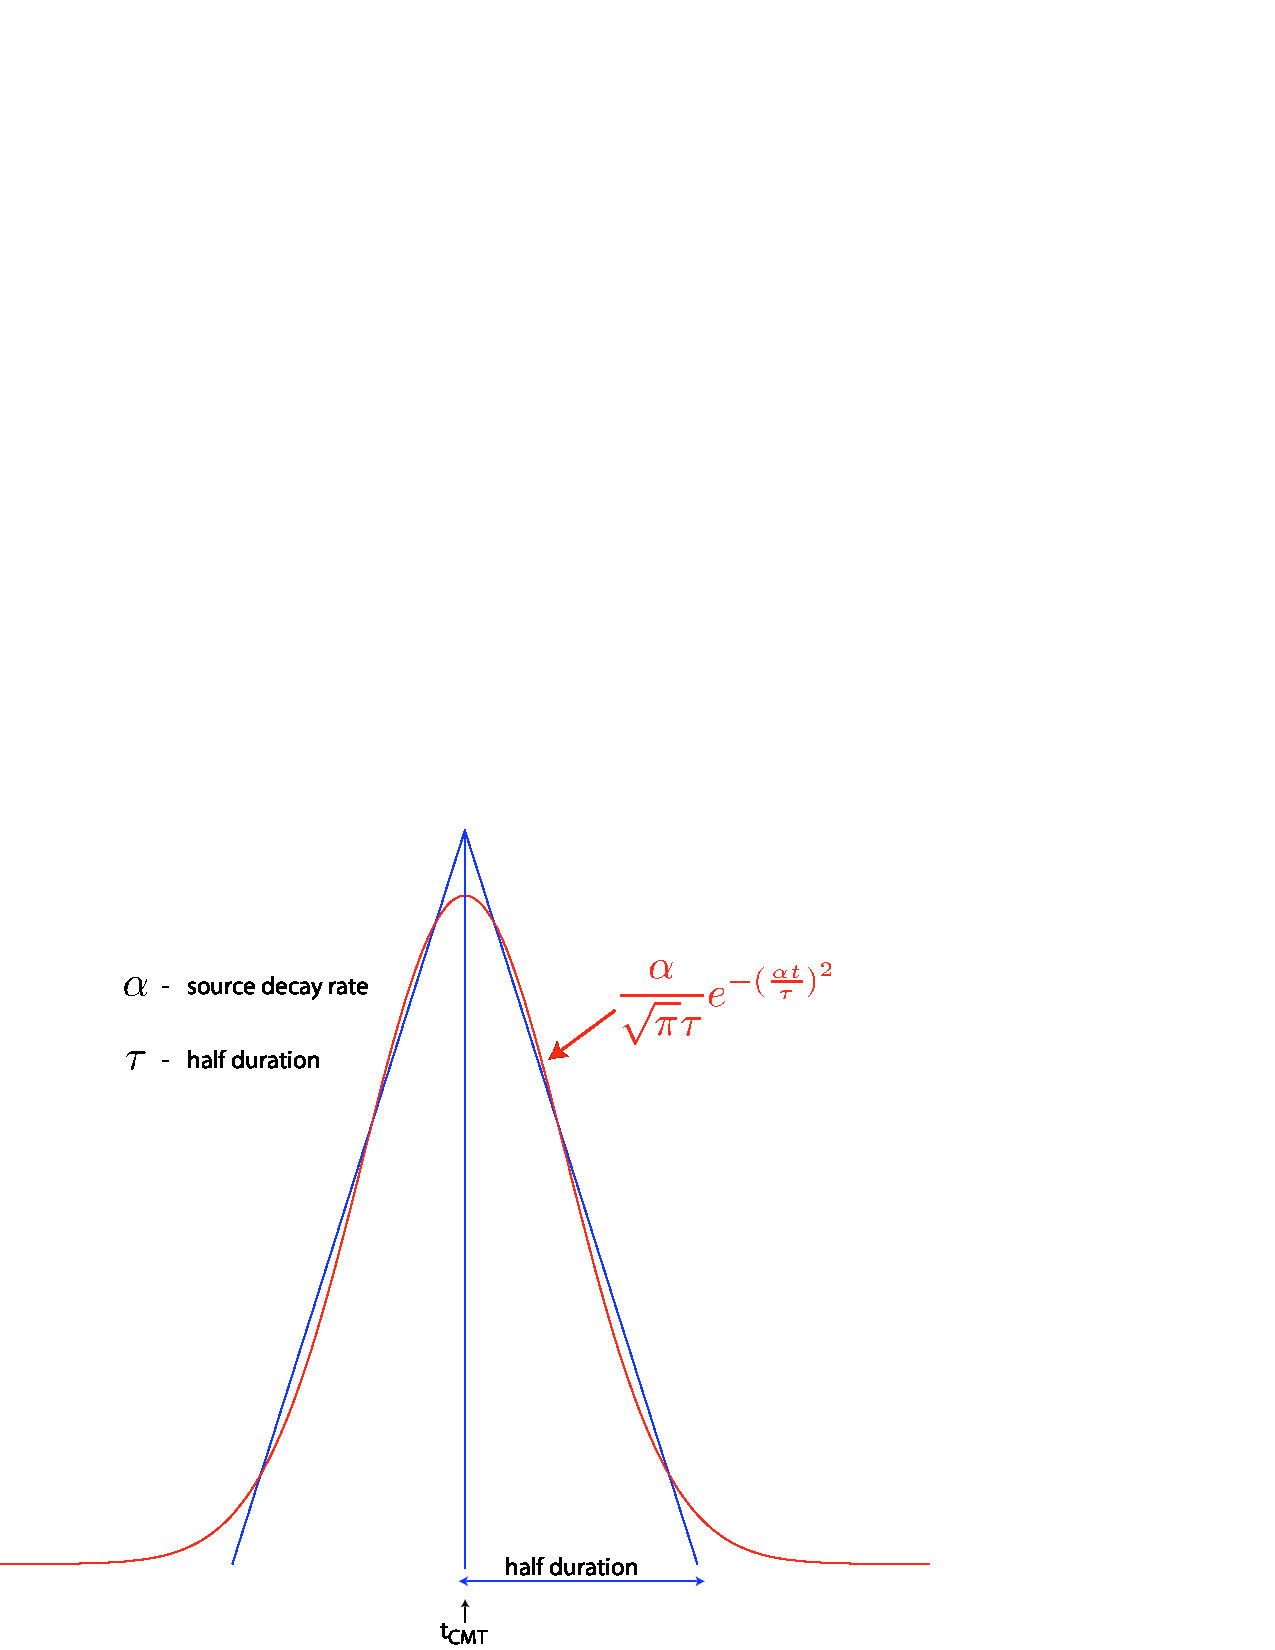 Comparison of the shape of a triangle and the Gaussian function actually used.